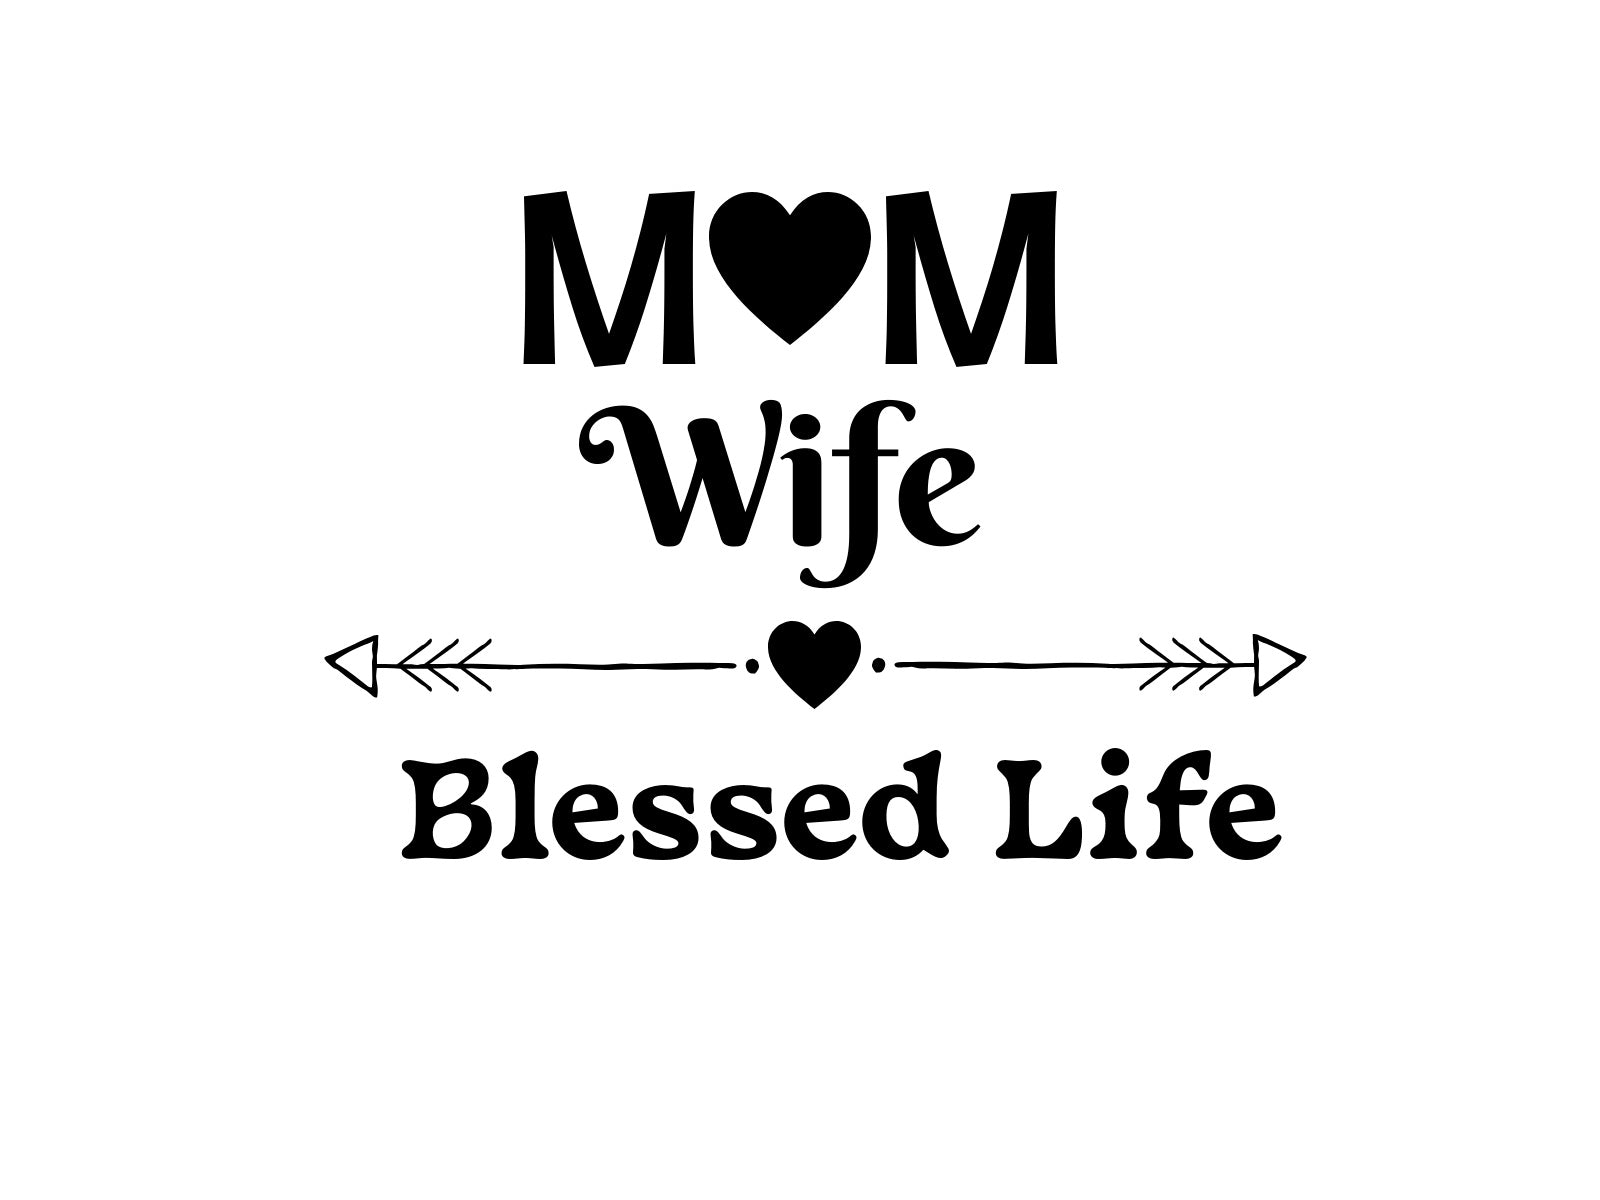 Mom Wife Blessed Life